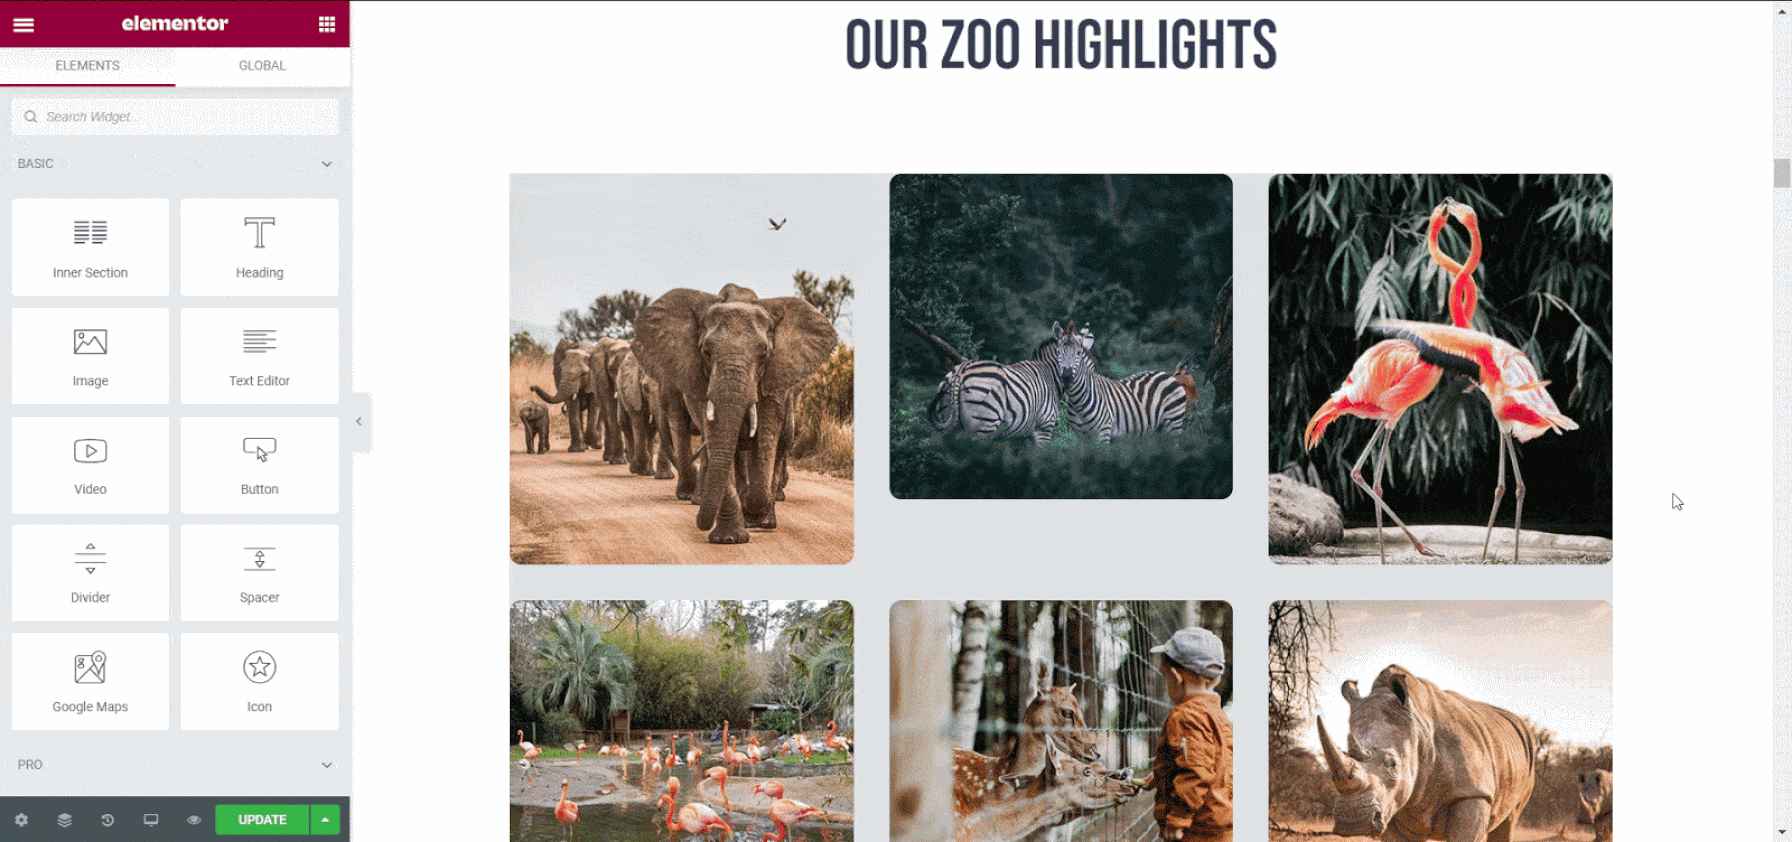 How To Create A Safari Or Zoo Website In WordPress Using Elementor Ready Template 5